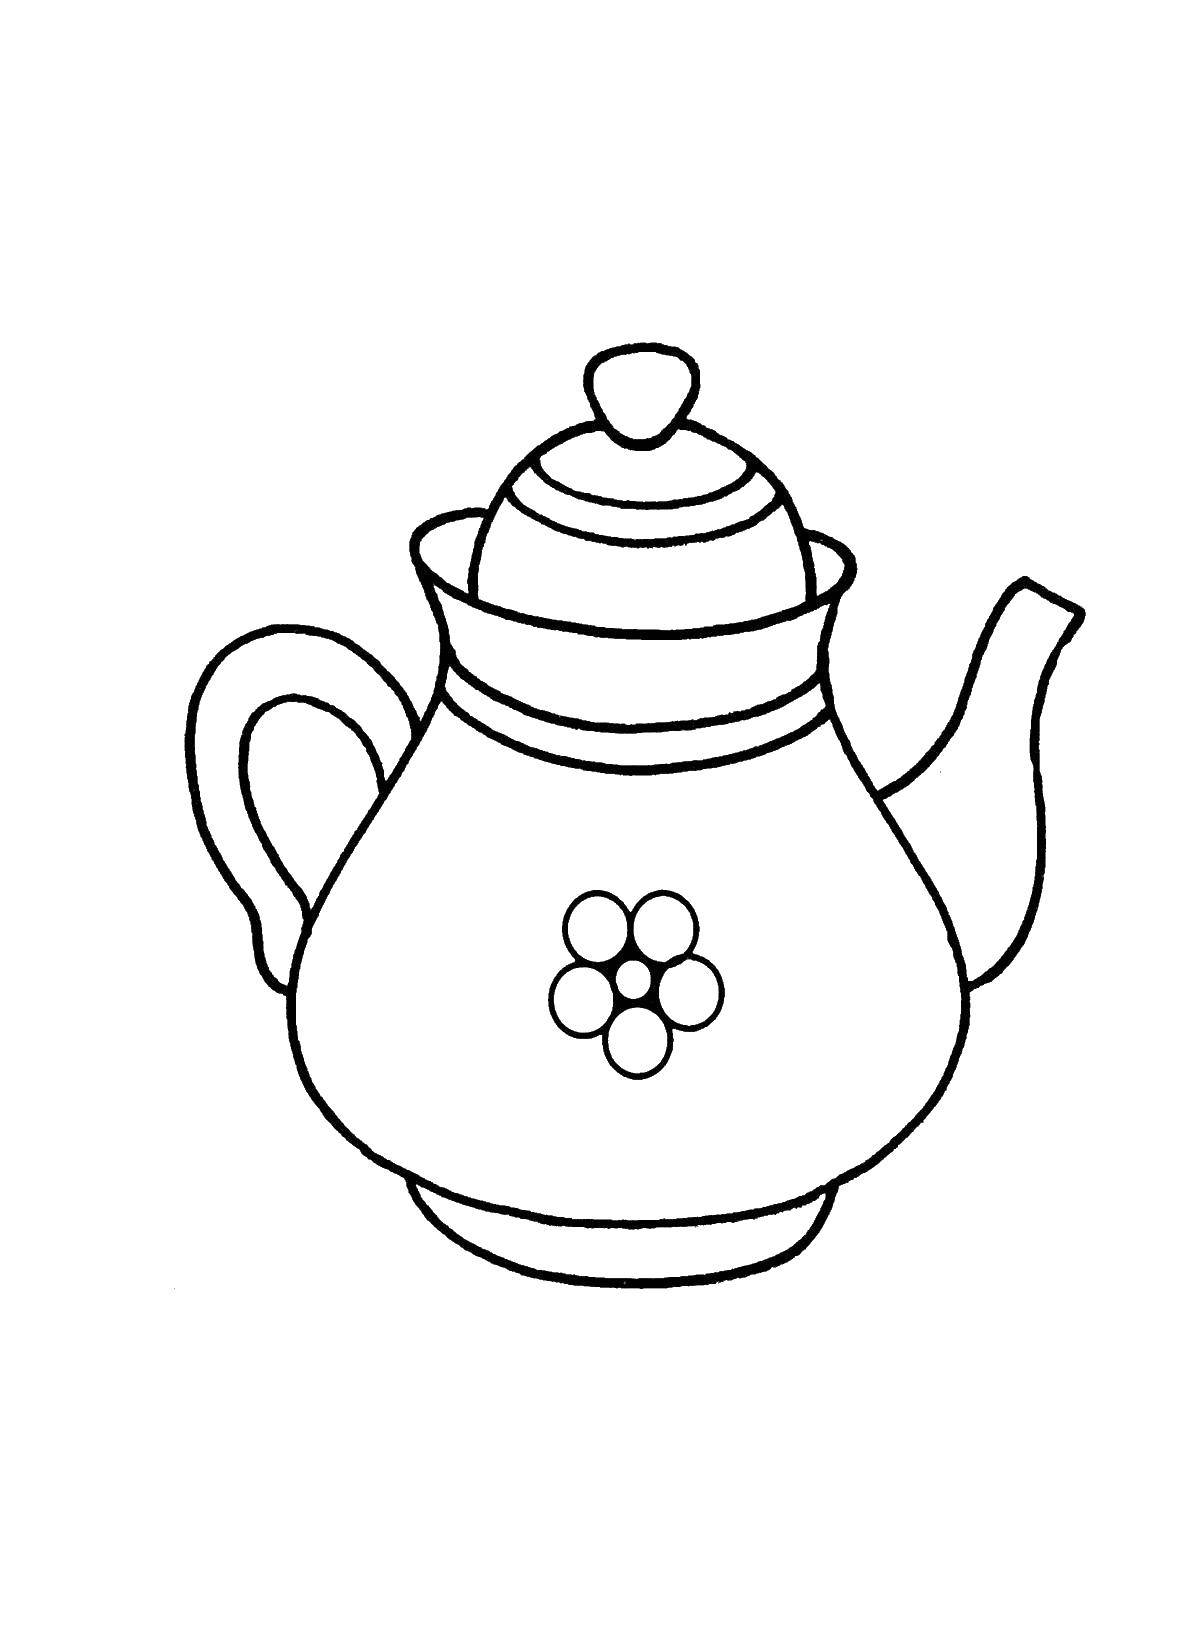 Coloring Kettle. Category dishes. Tags:  Crockery, kettle, glass.